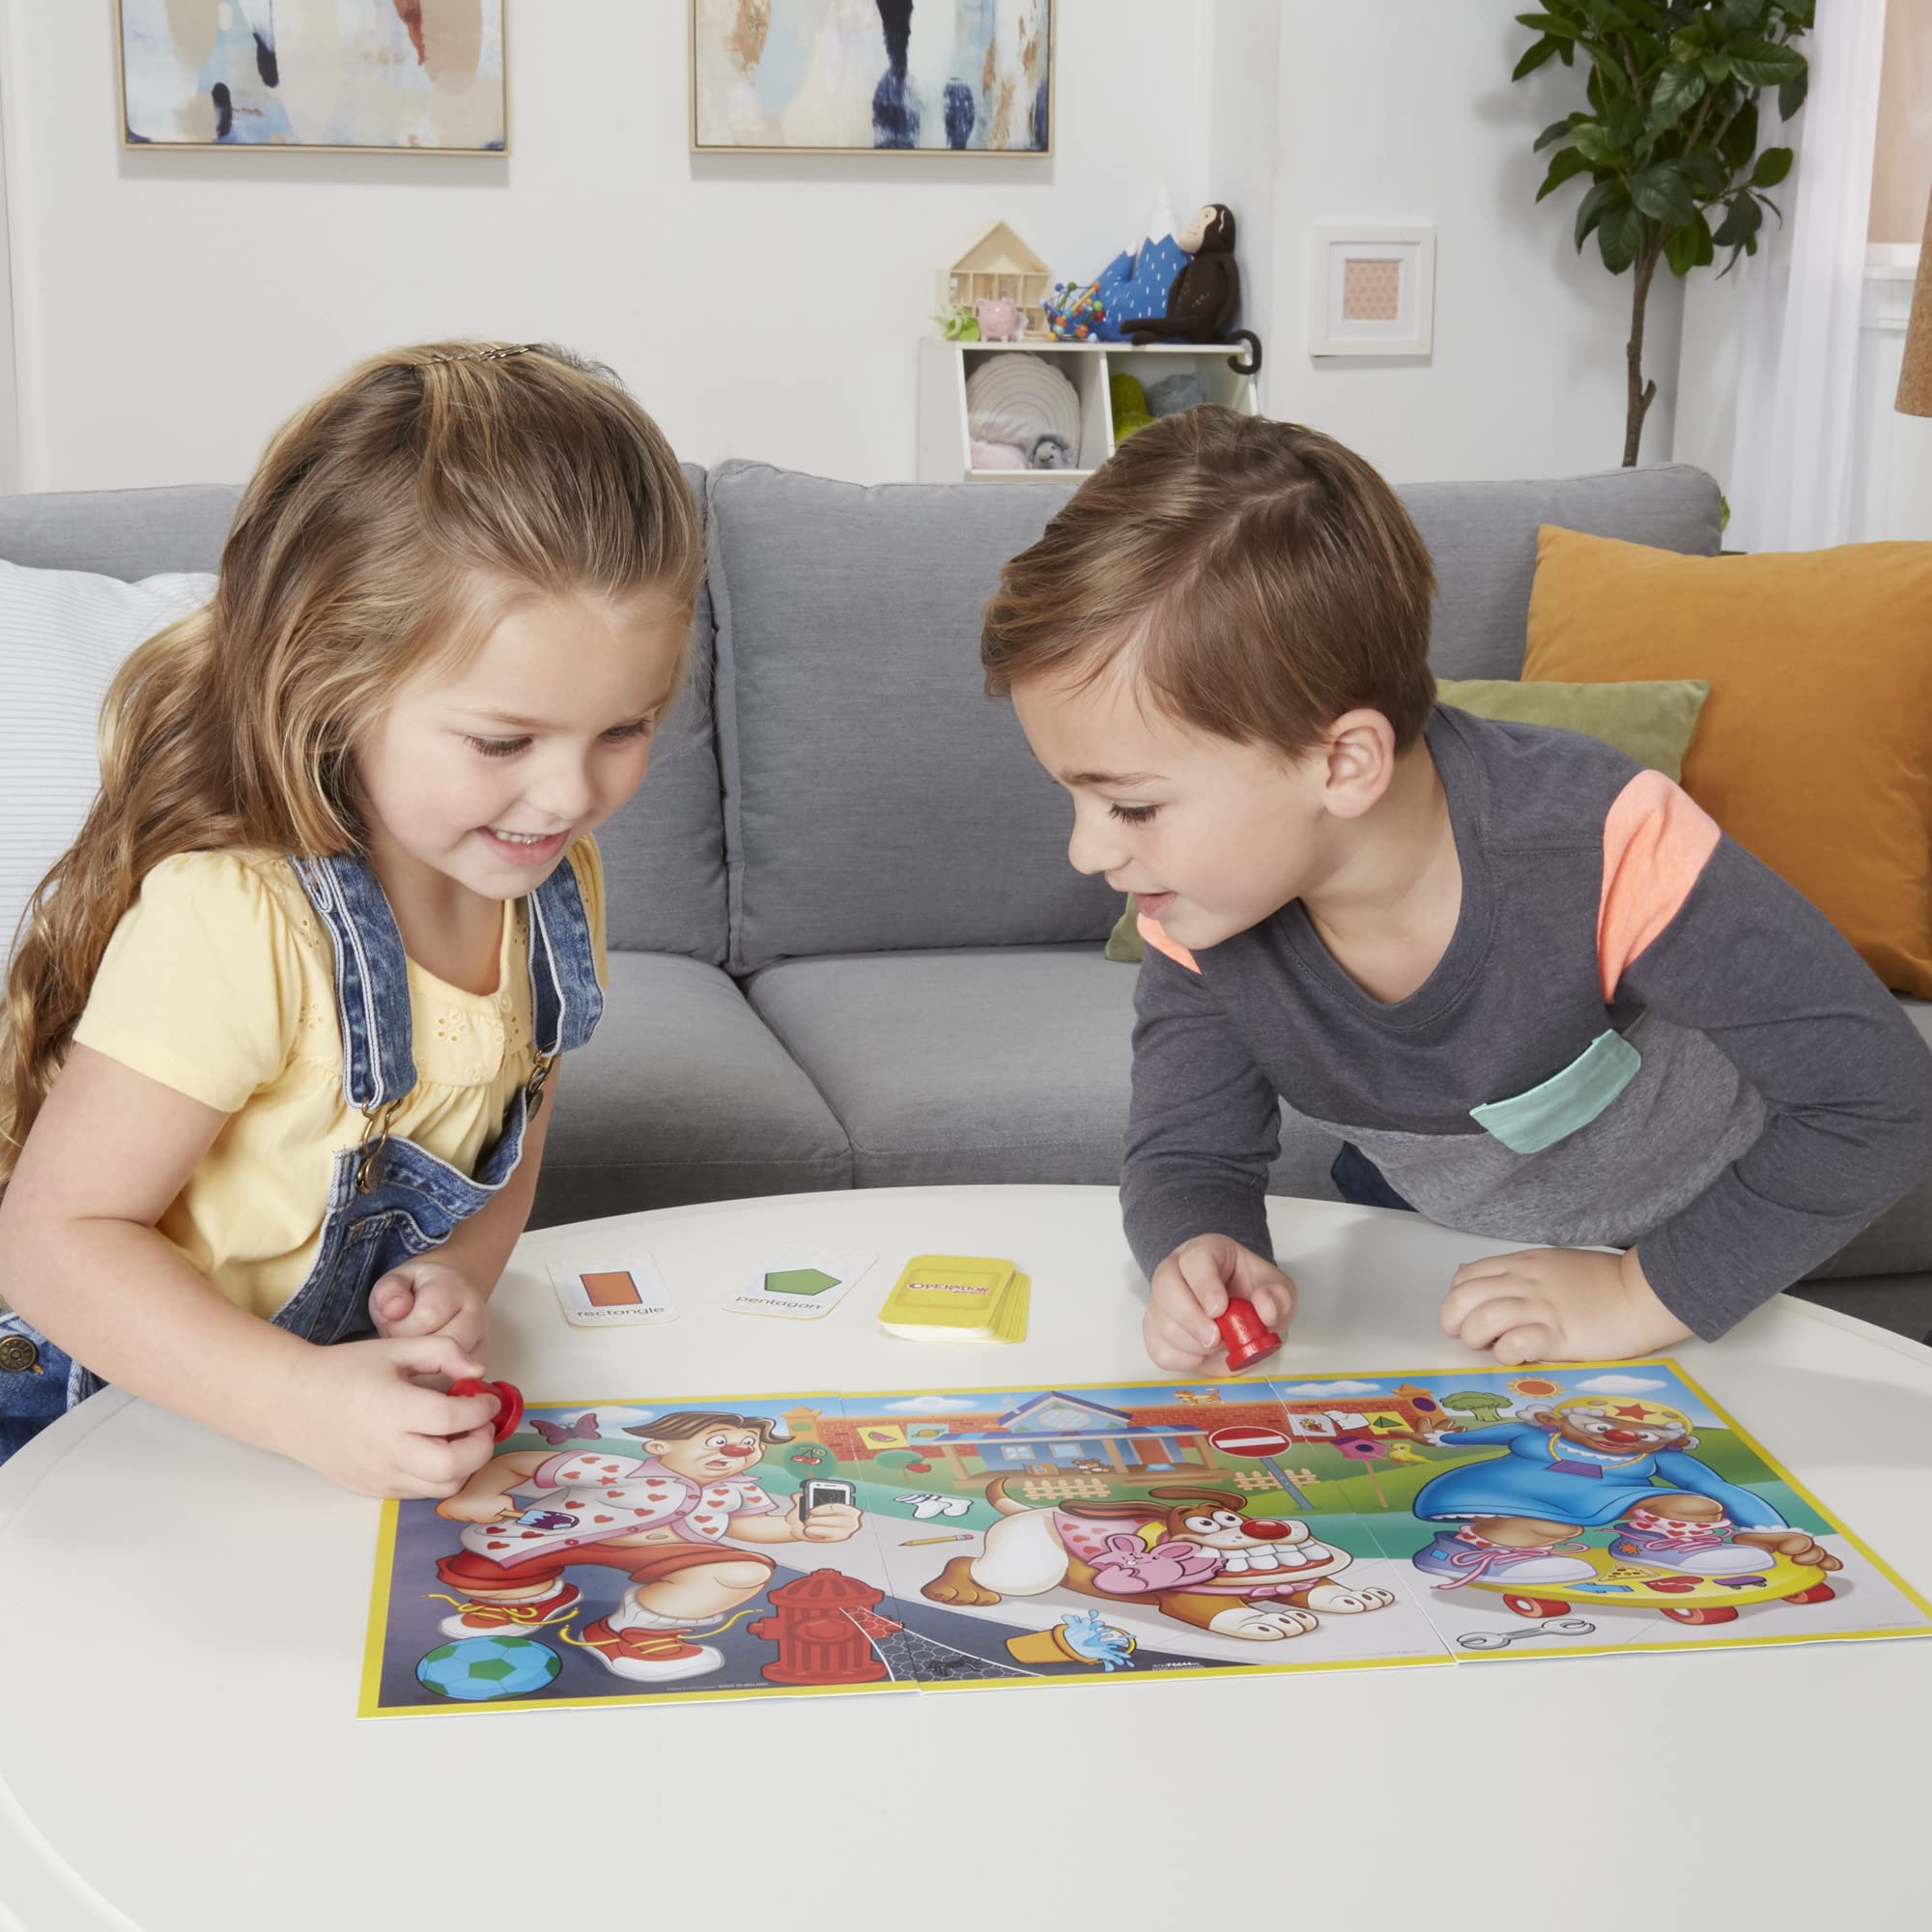 Hasbro Gaming Operation Junior Board Game for Preschoolers and Kids Ages 3 and Up, Operation Game for Younger Kids, Preschool Games, Kids Games